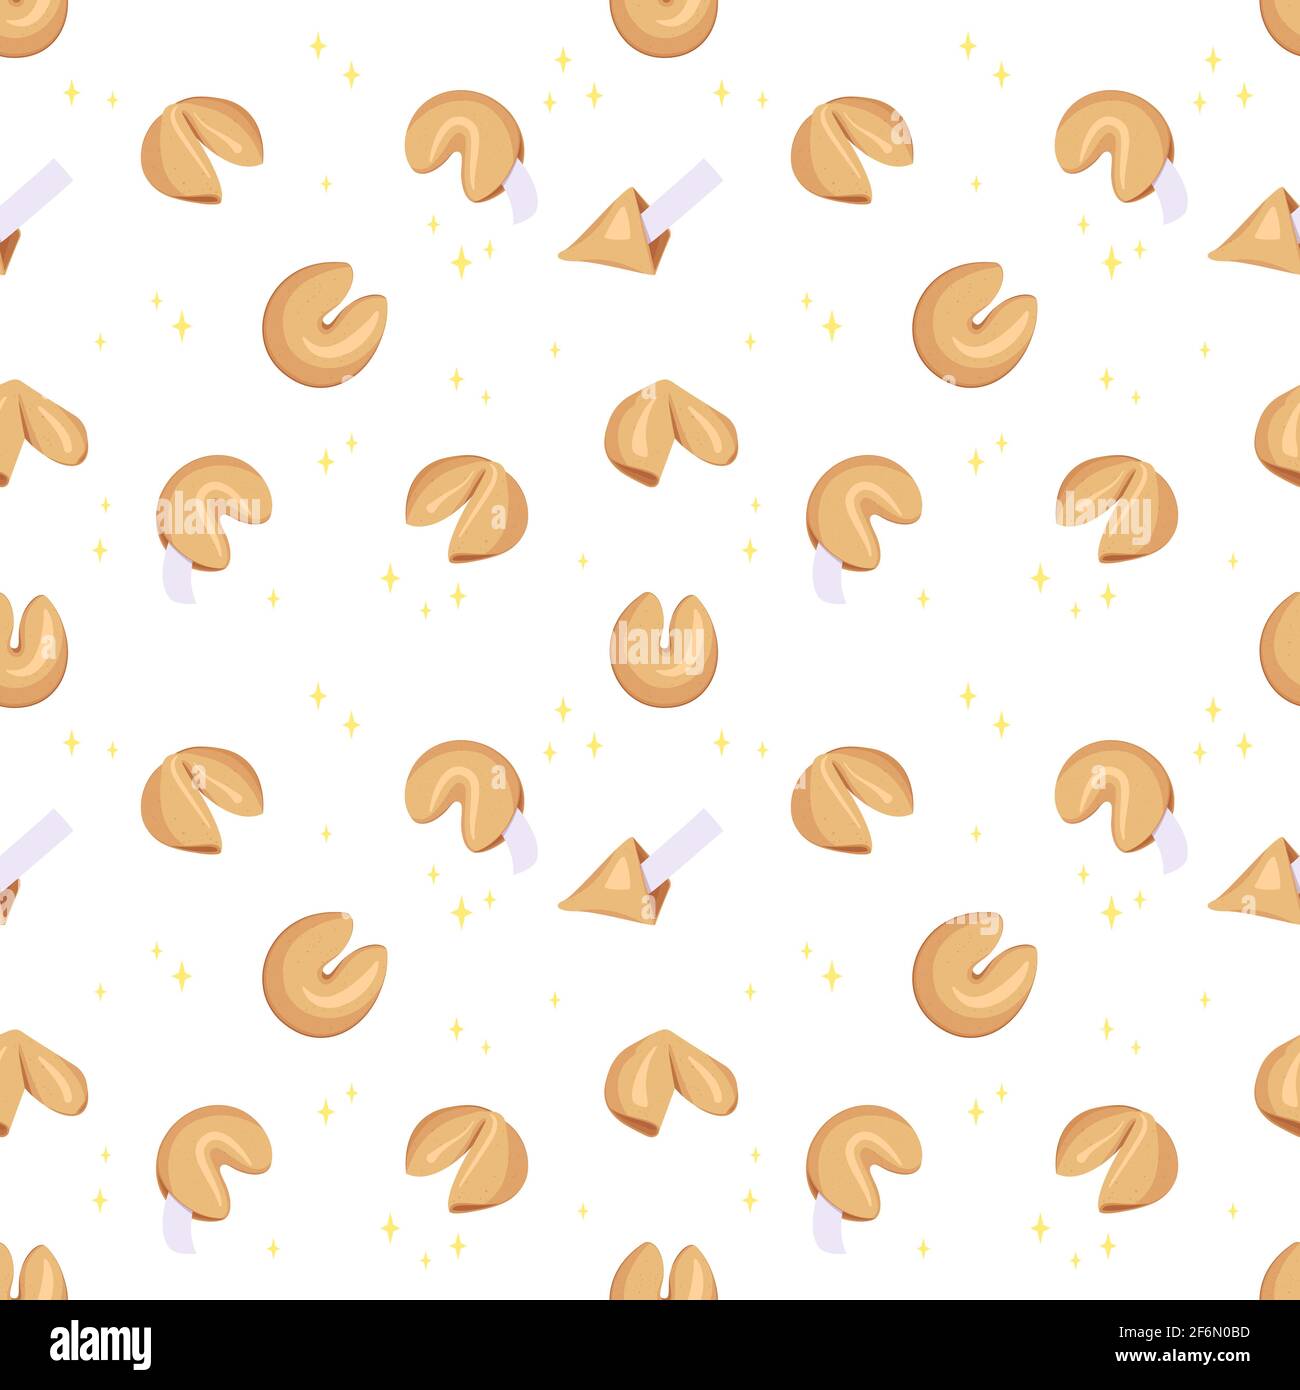 Seamless pattern with chinese fortune cookies. Set of bakery elements. Cute print of delicious sweets and pastries for bakery, holiday and new year Stock Vector